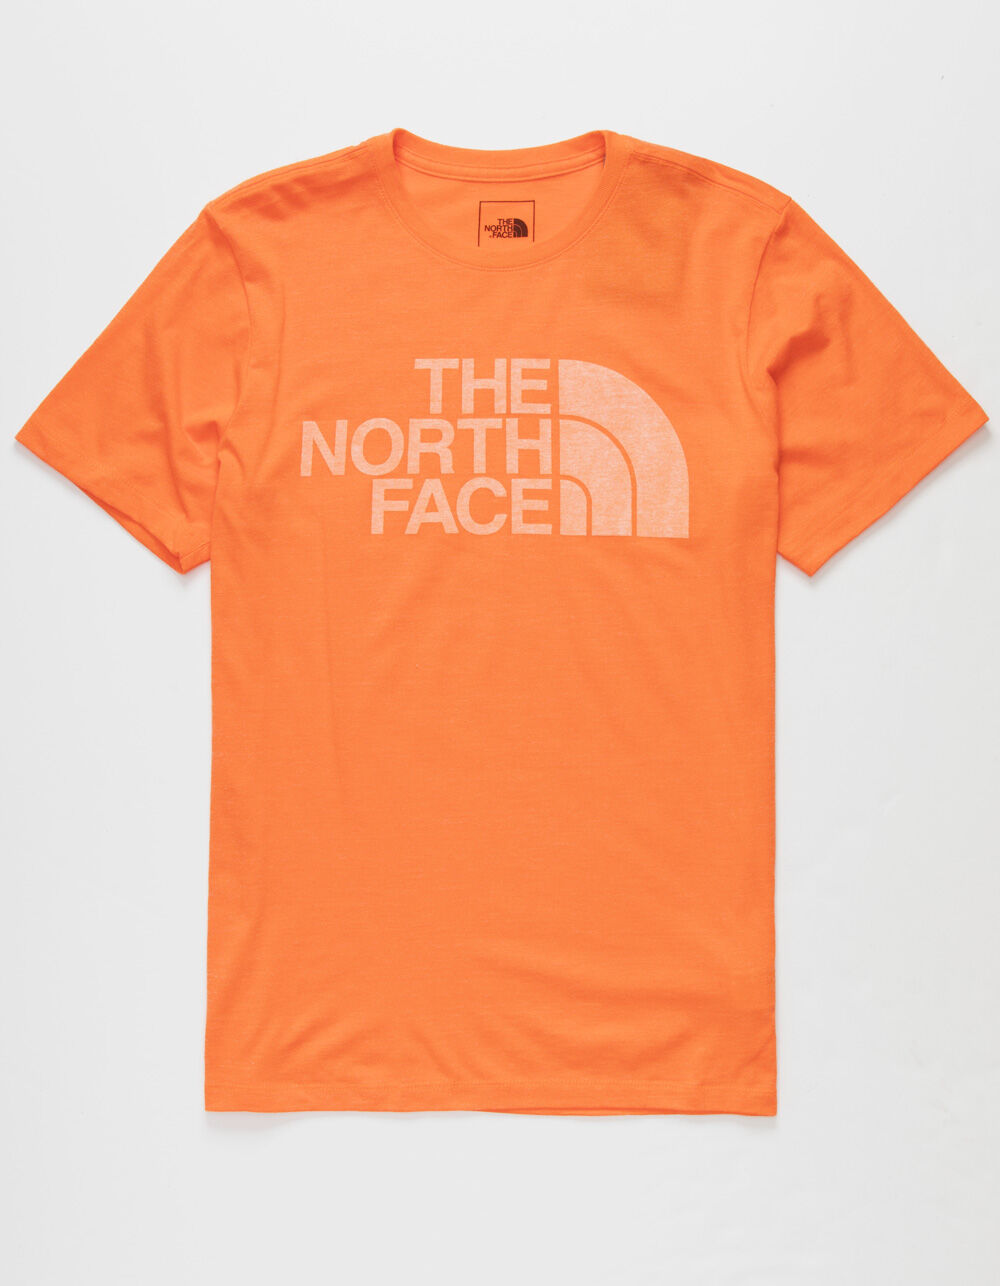 THE NORTH FACE Half Dome Mens Tri-Blend T-Shirt - HEATHER RED | Tillys